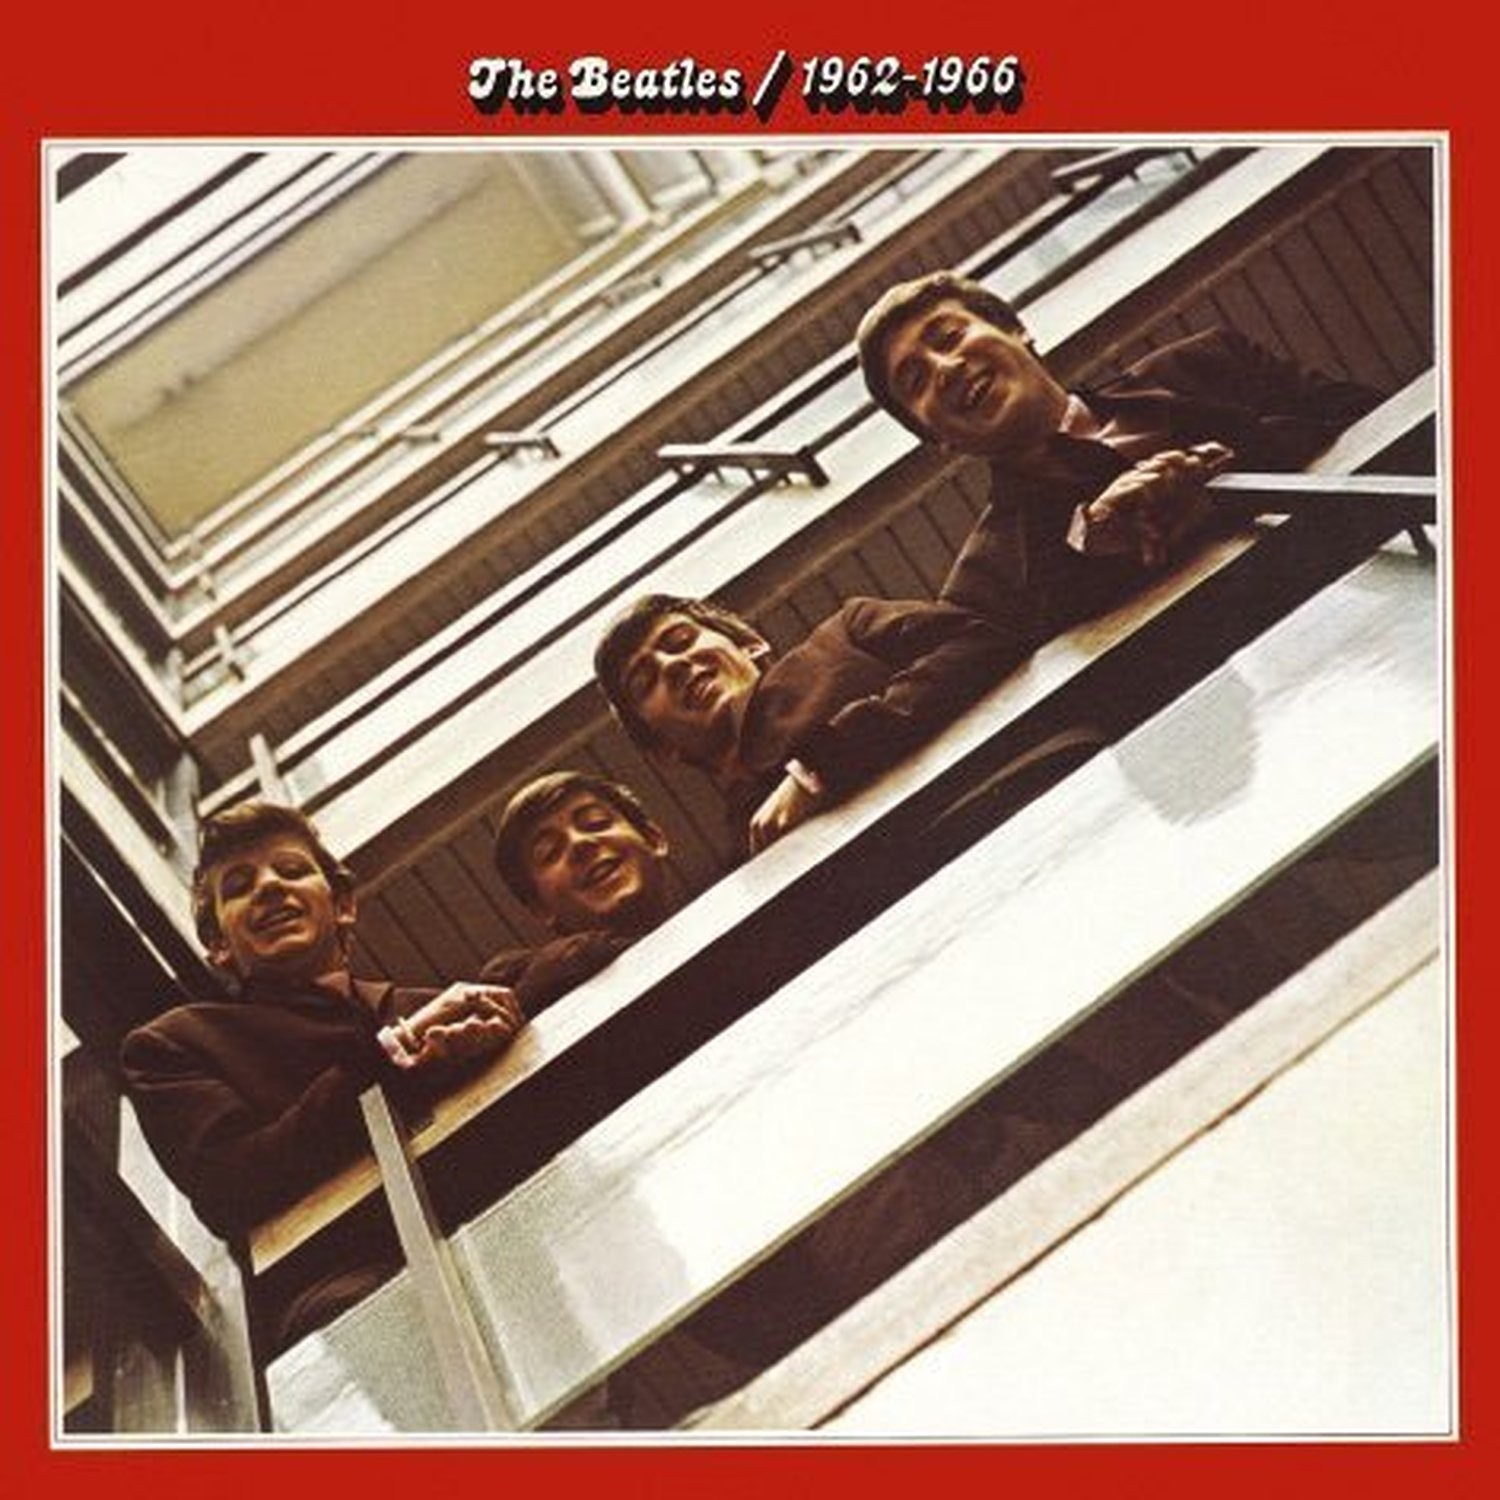 The Beatles Red Album Greeting Birthday Card Any Occasion Cover Fan Official